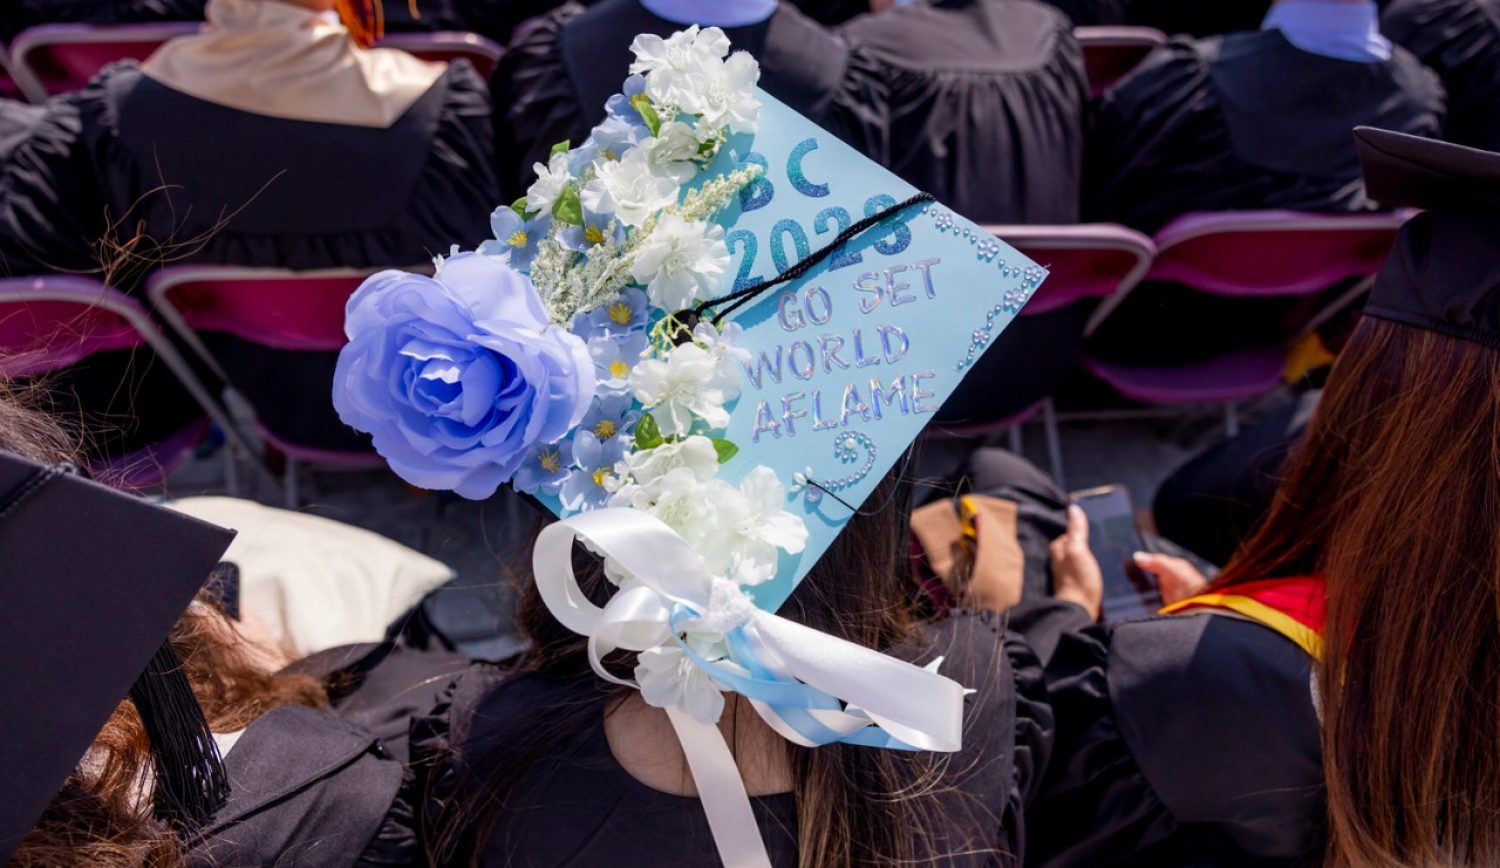 A graduation cap decorated, reading "Class of 2023: Go set the world aflame'